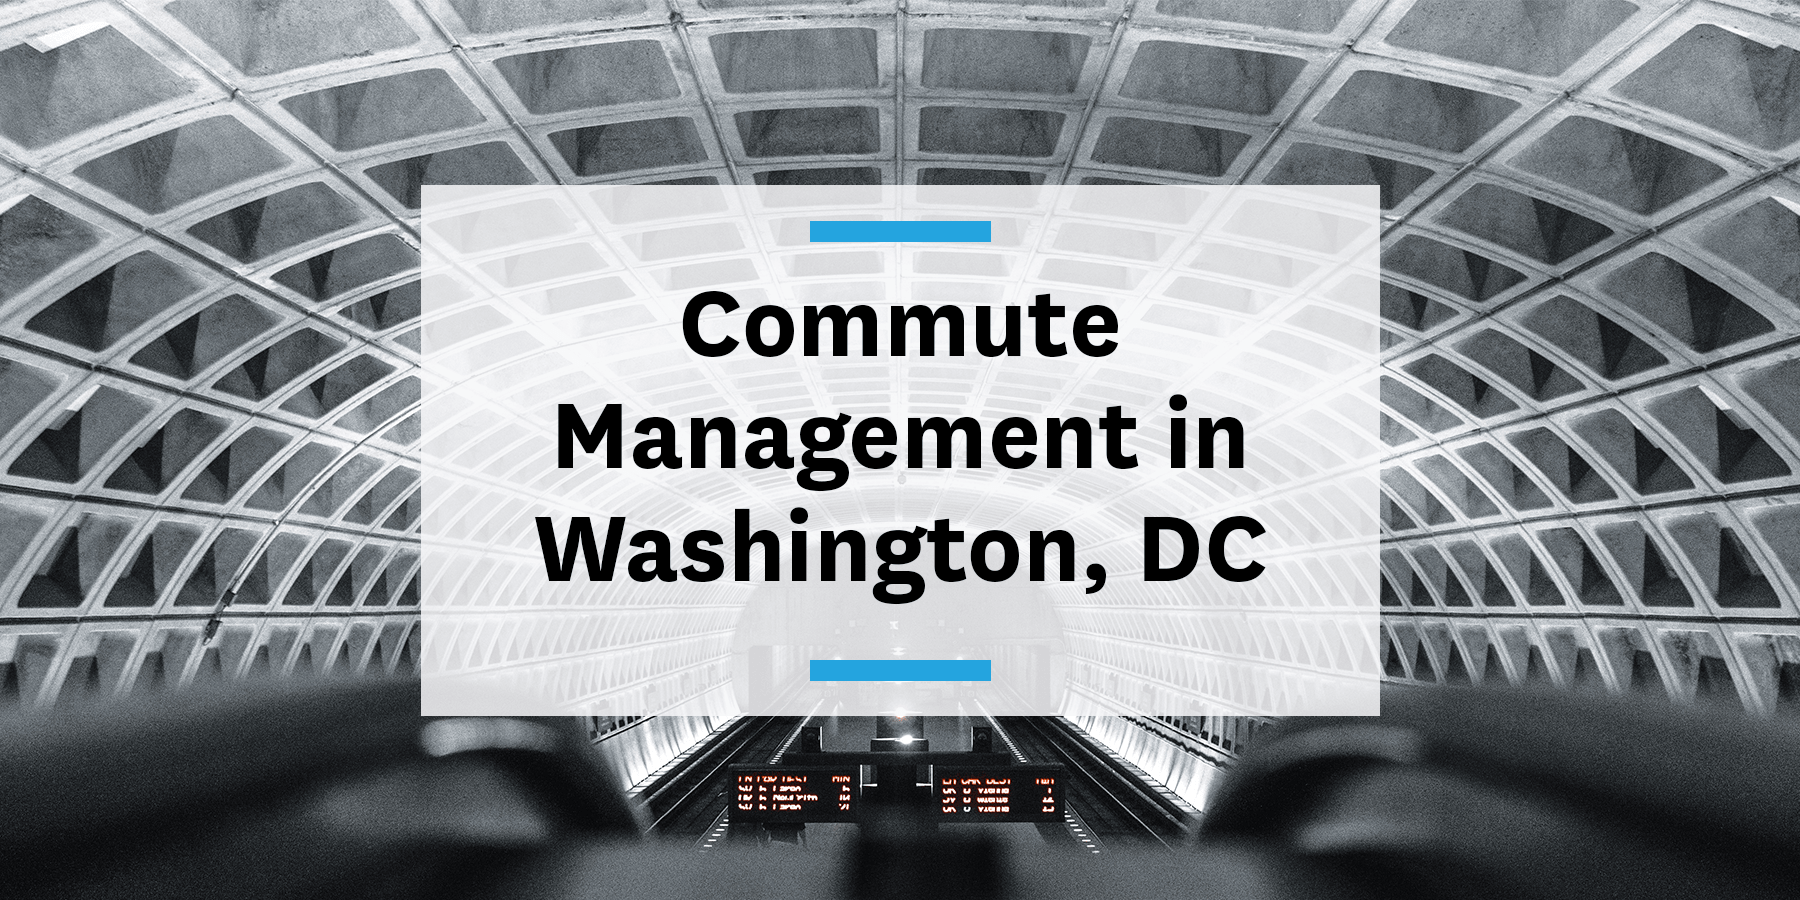 Feature images for commute management in Washington, DC